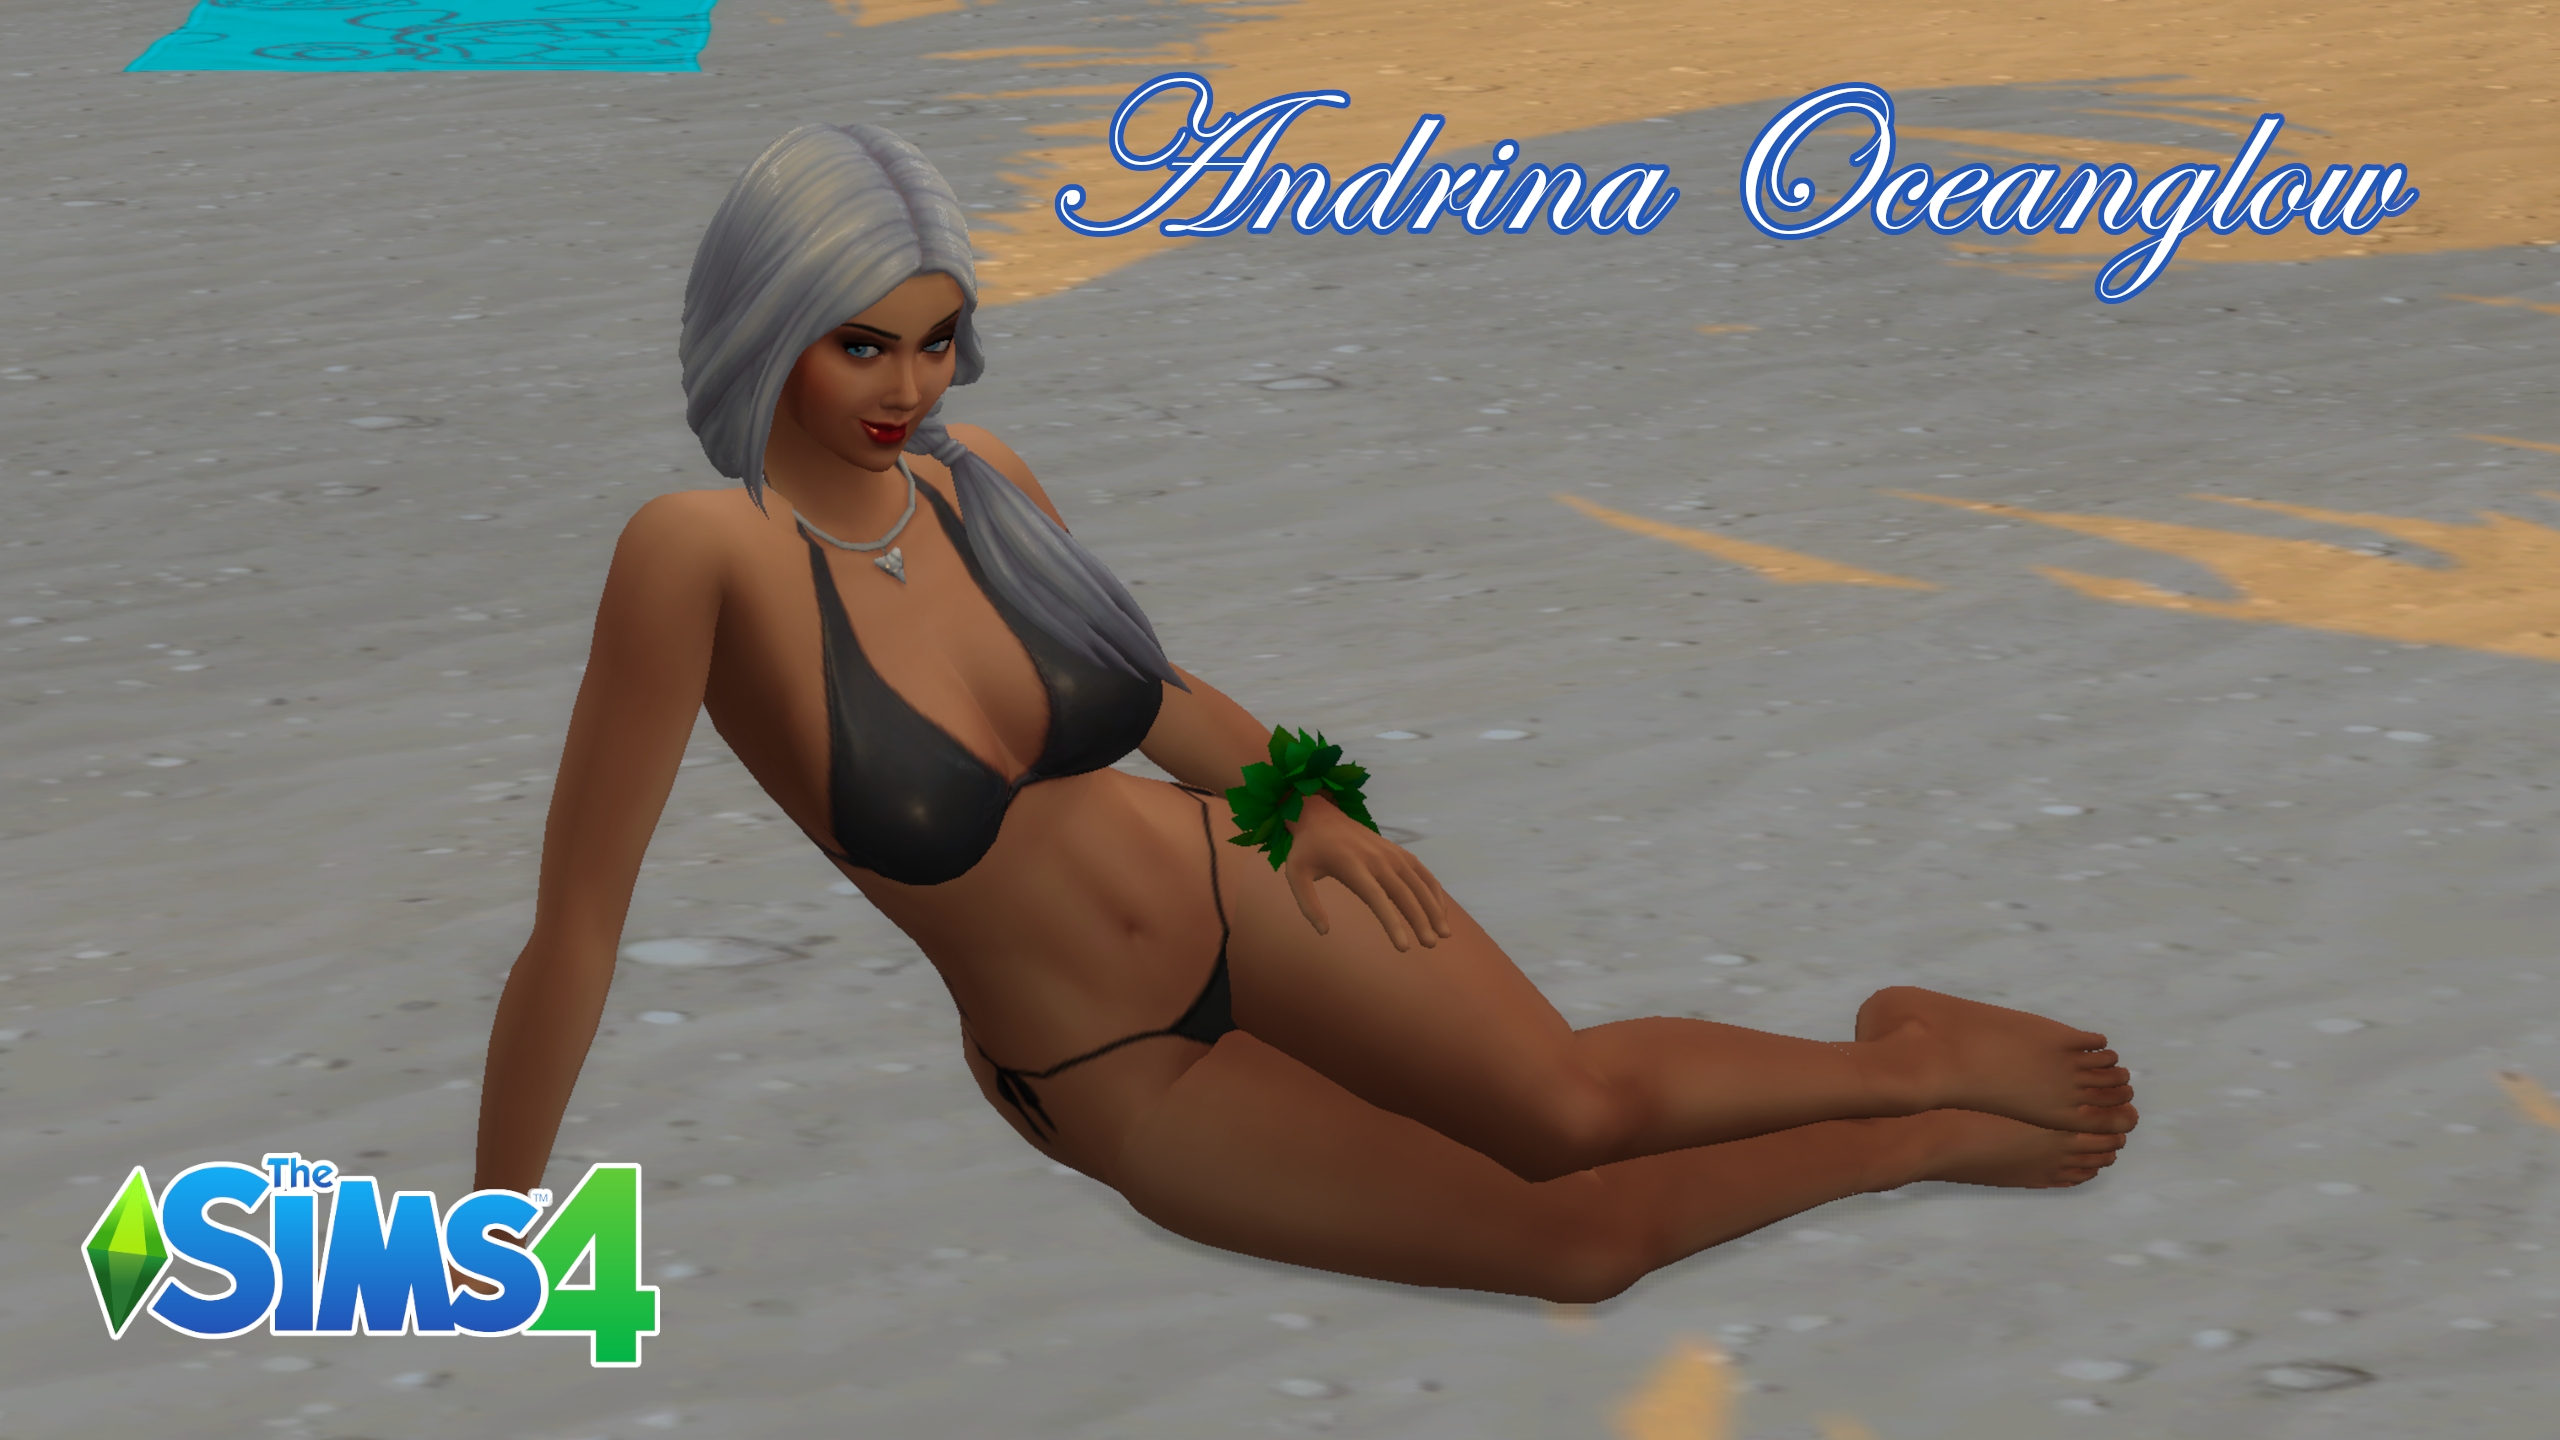 Sims 4 - Mermaid Andrina Oceanglow The Sims 4 Mermaid Siren White Hair Bustyfemale Thong Big Ass Toned Female Topless 6